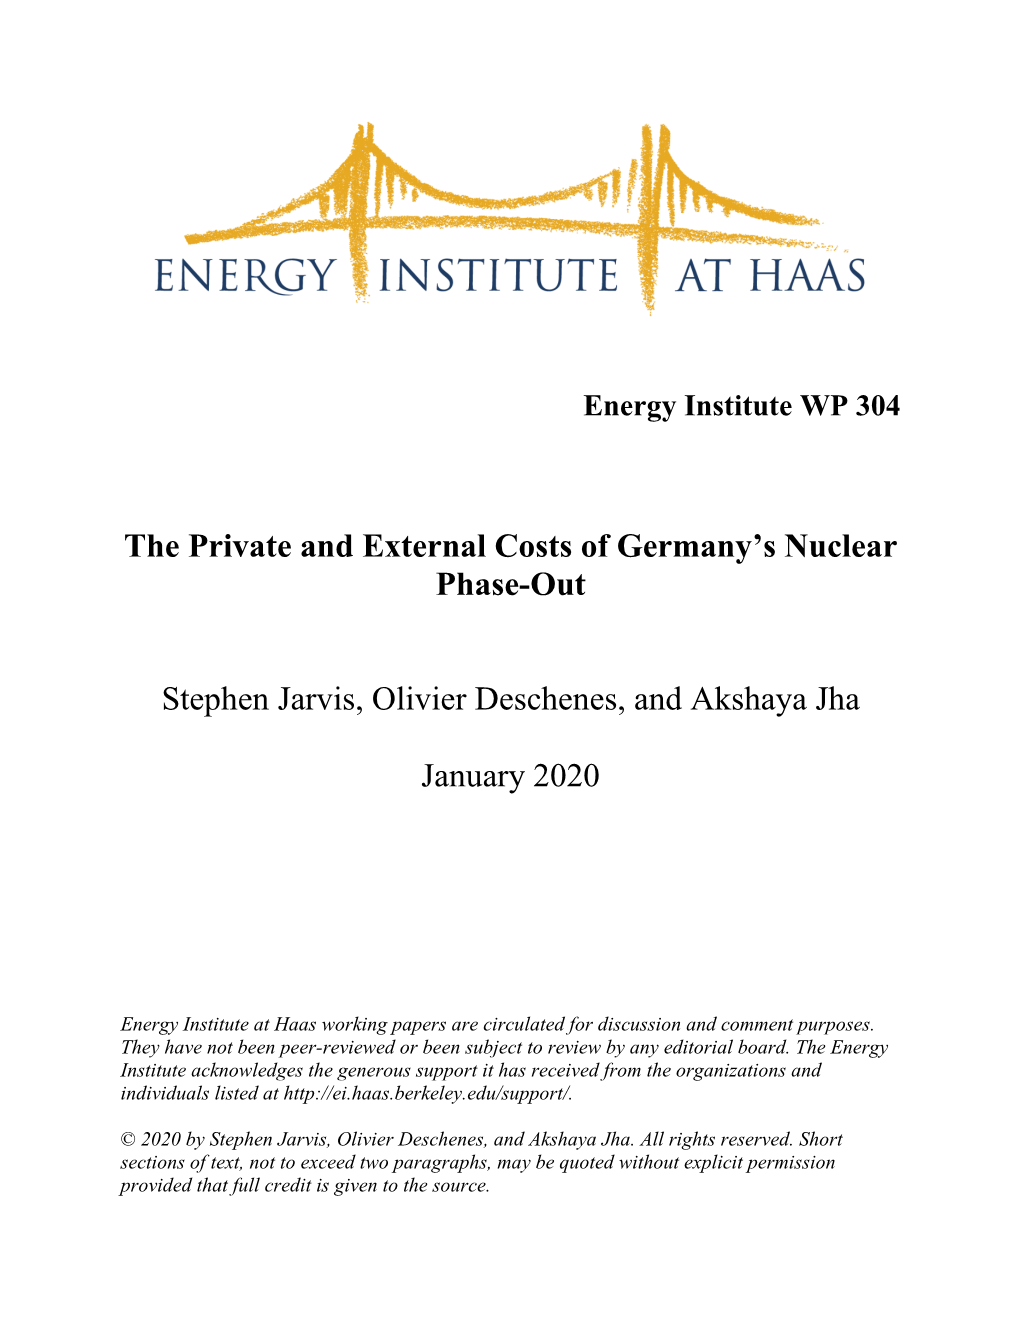 The Private and External Costs of Germany's Nuclear Phase-Out